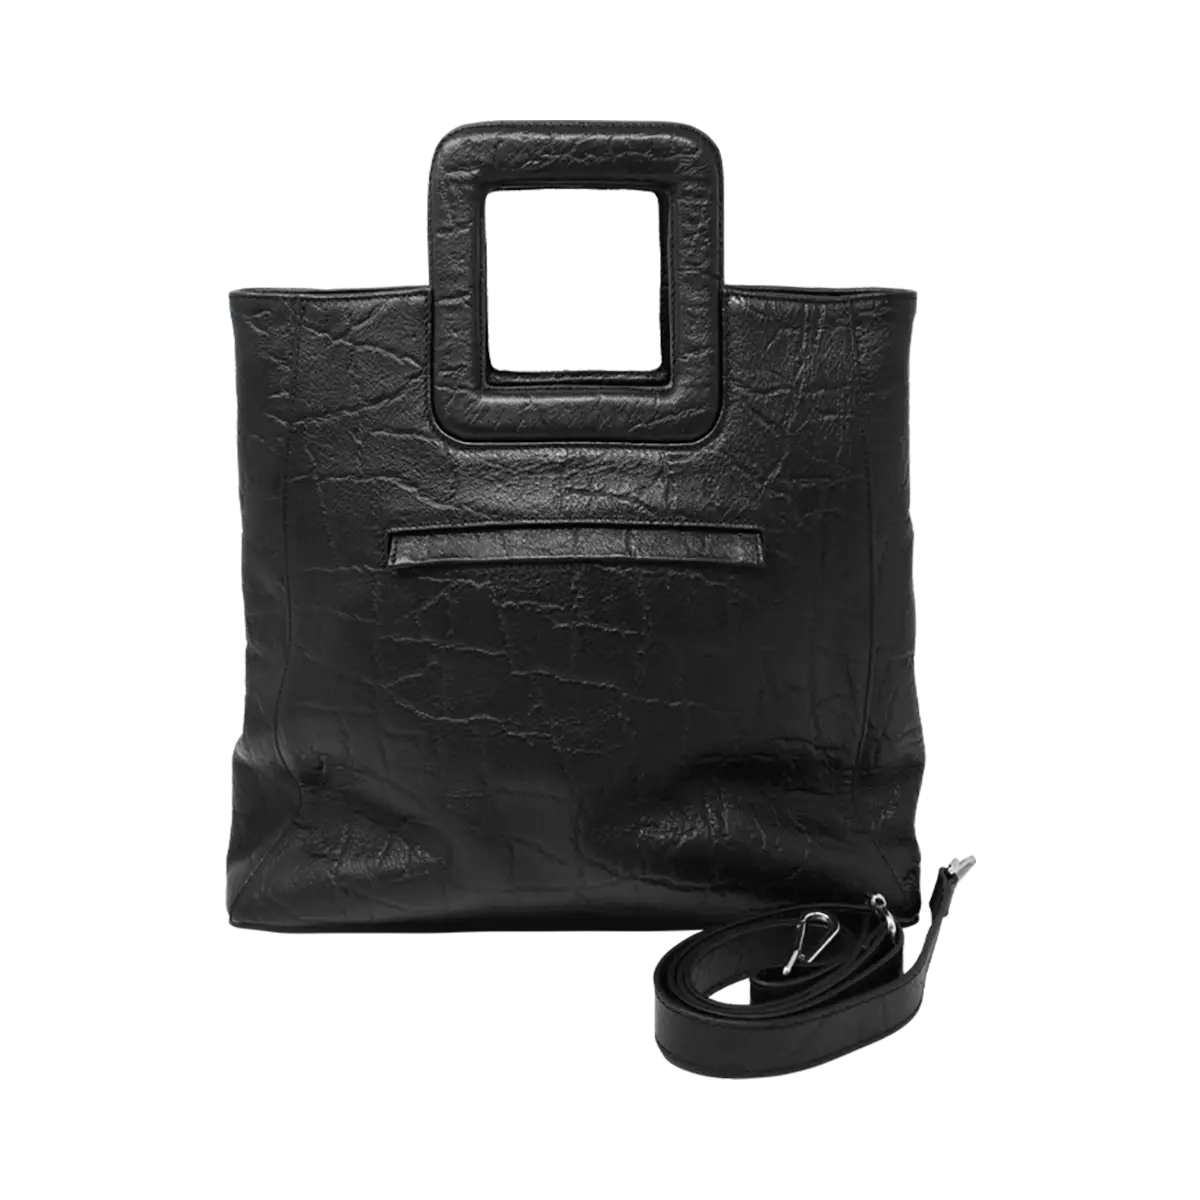 large black leather print handbag with a square handle. Accessory for women in San Diego, CA.